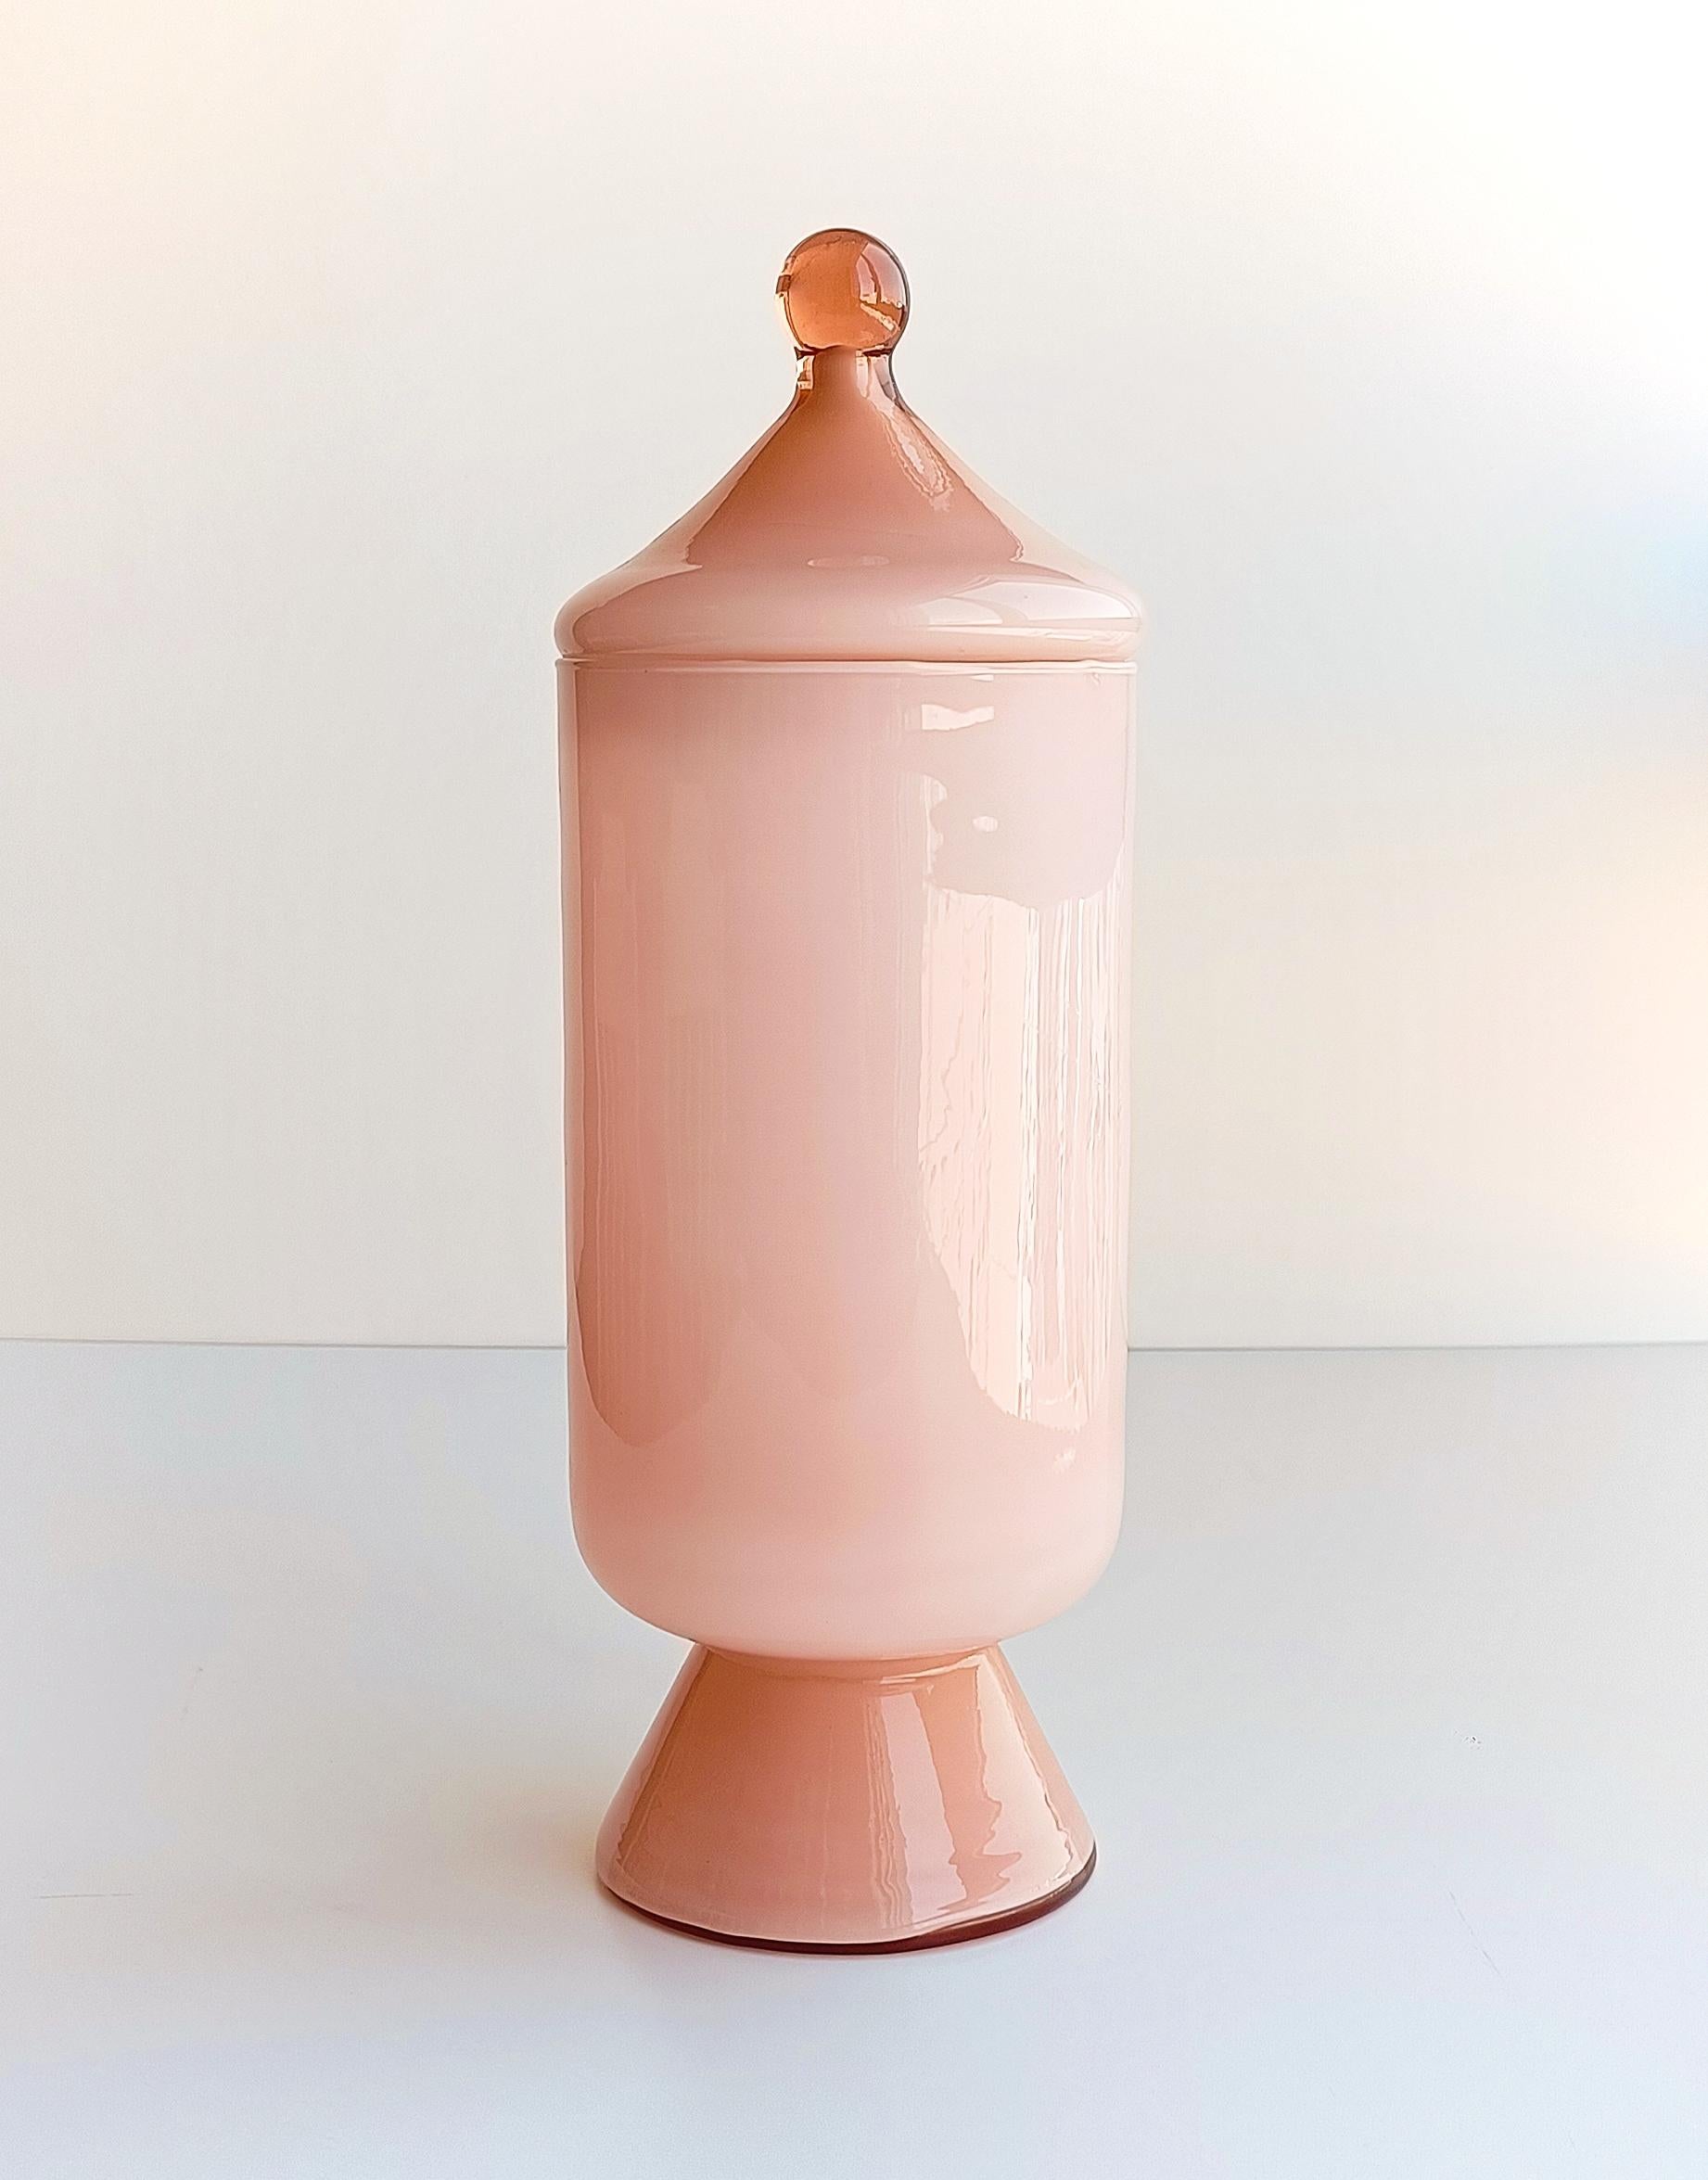 Stunning pale pink cased glass bombon jar, featuring a gorgeous circus tend lid and a sleek beyond chic design. The glass is thin and delicate. Exquisitely manufactured. Attributed to Carlo Moretti early years. Handcrafted in the island of Murano,